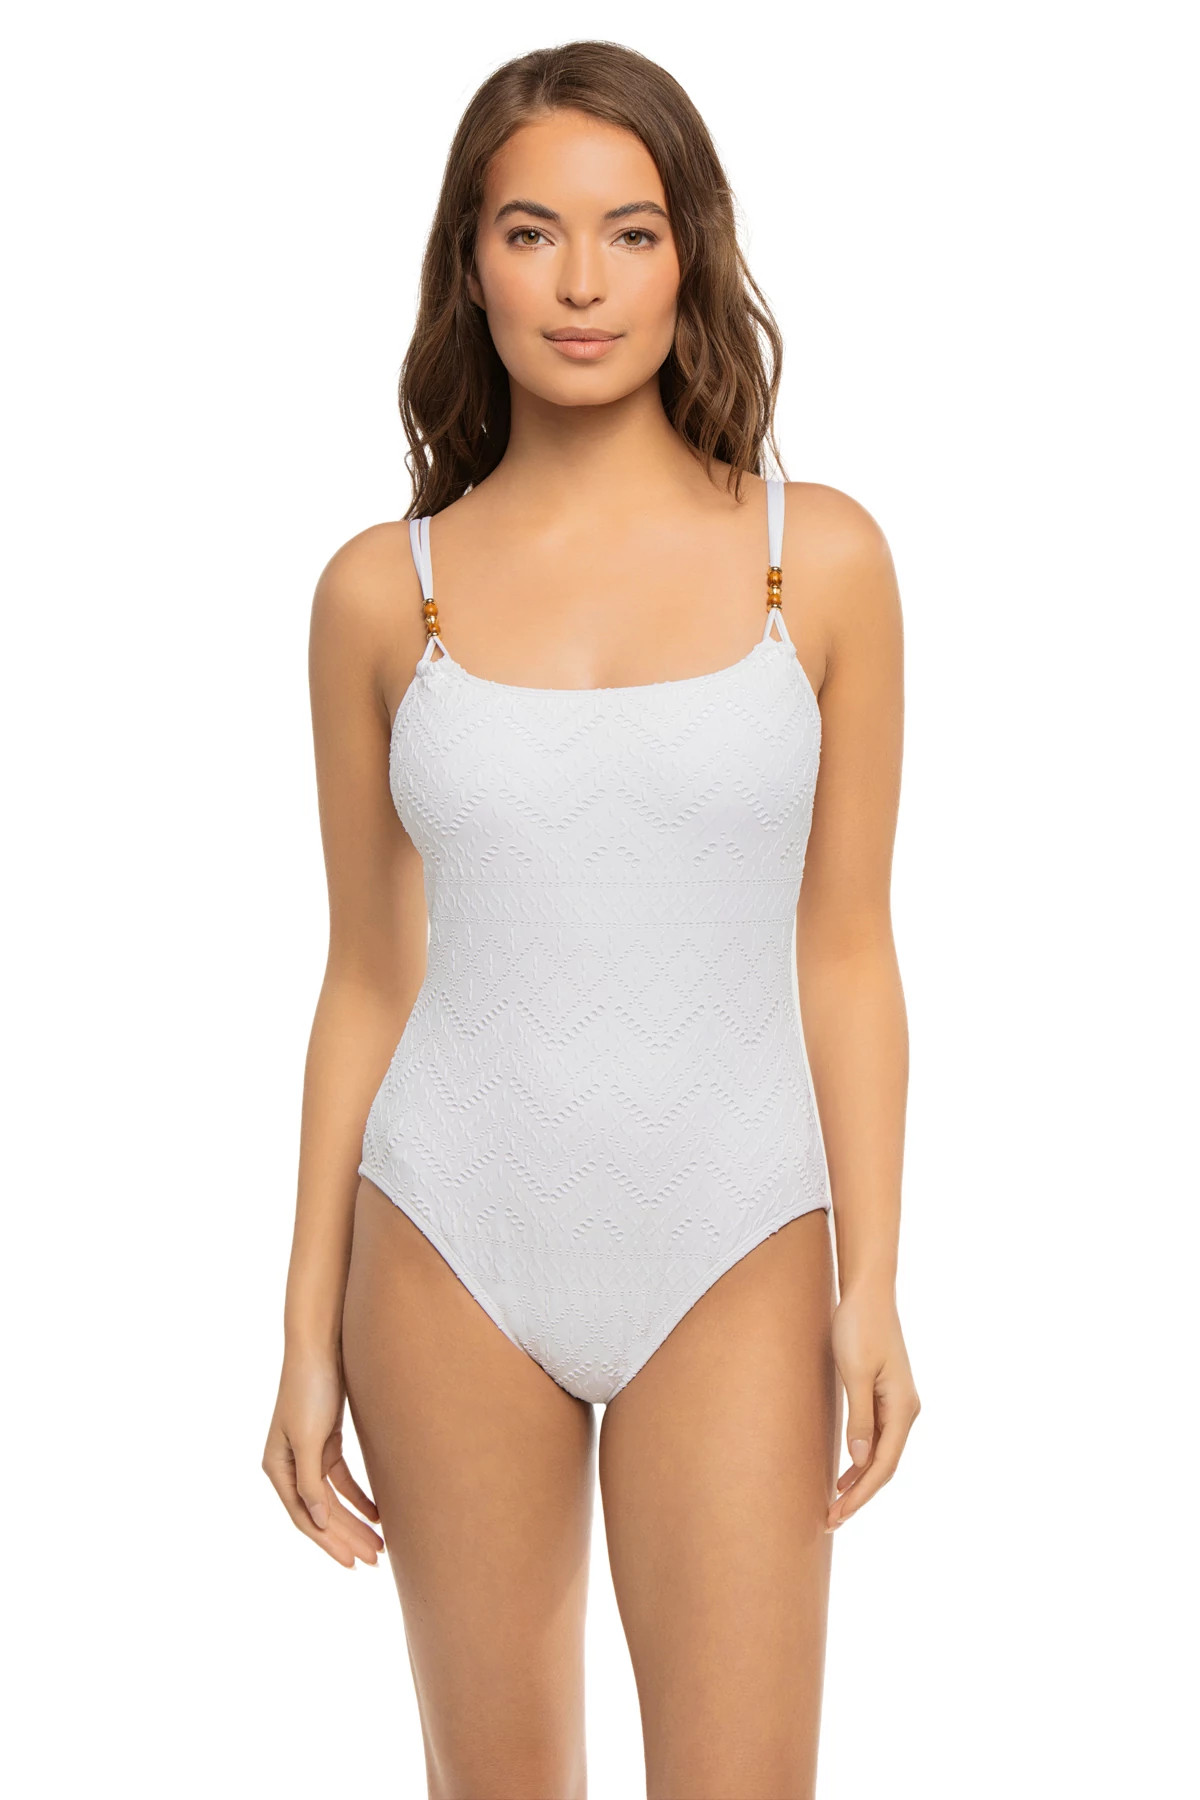 Saltwater Sands Lingerie One Piece Swimsuit image number 1